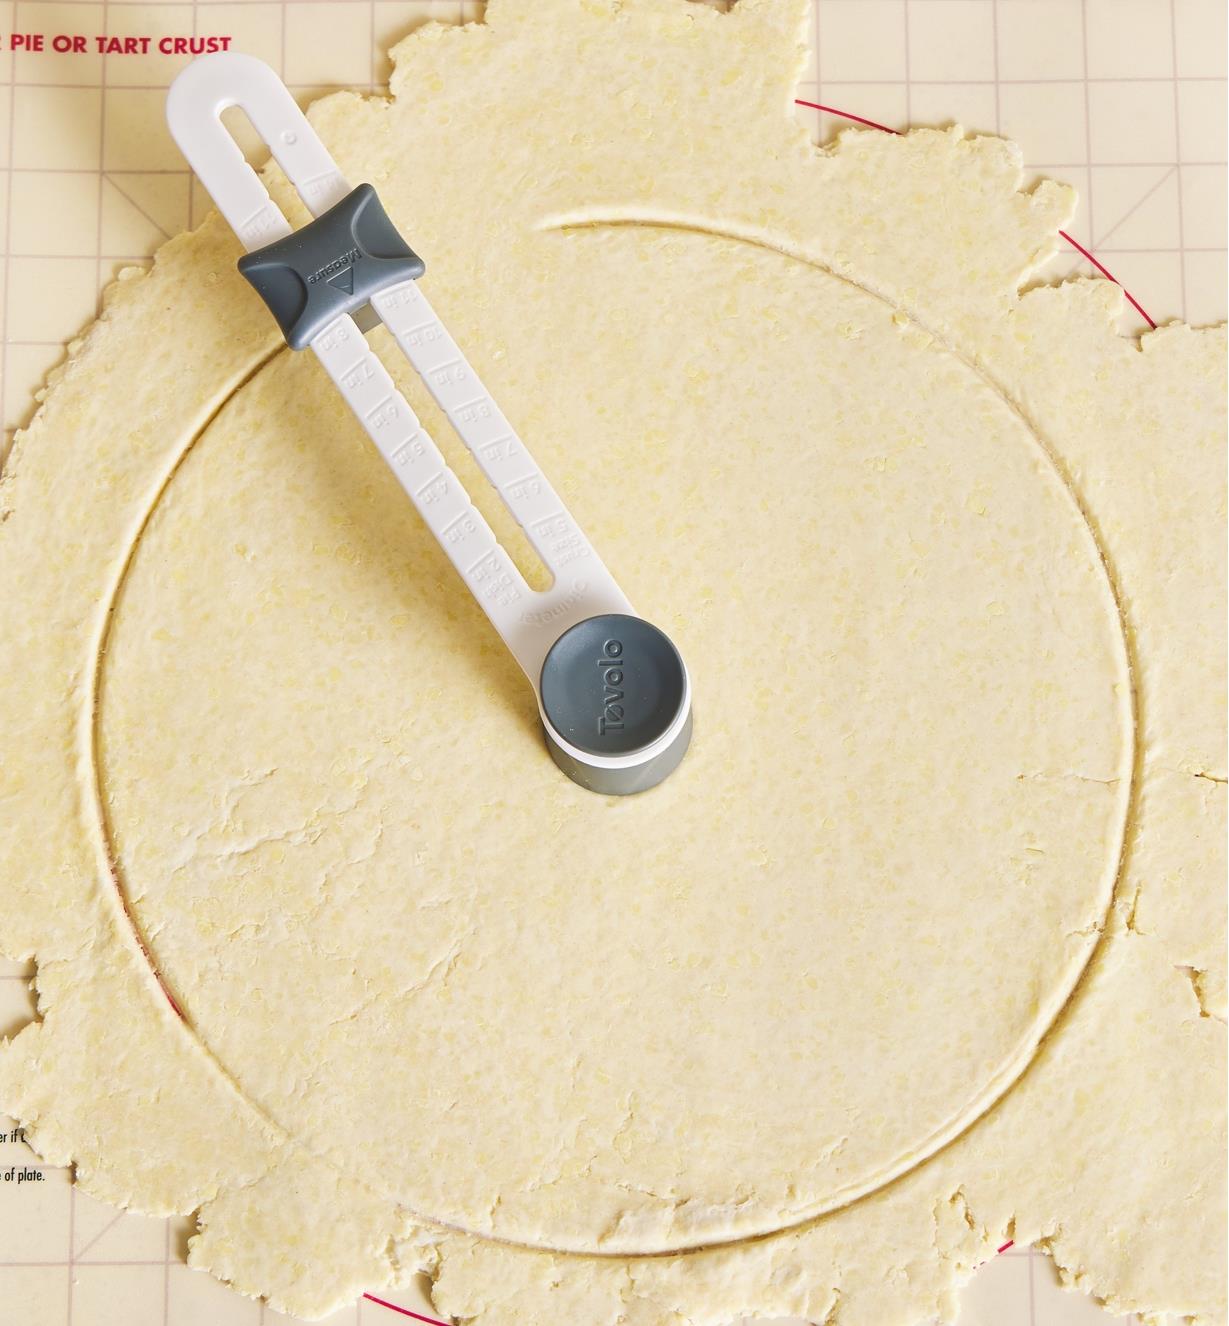 A pastry cutter positioned in the center of a circle of pastry dough